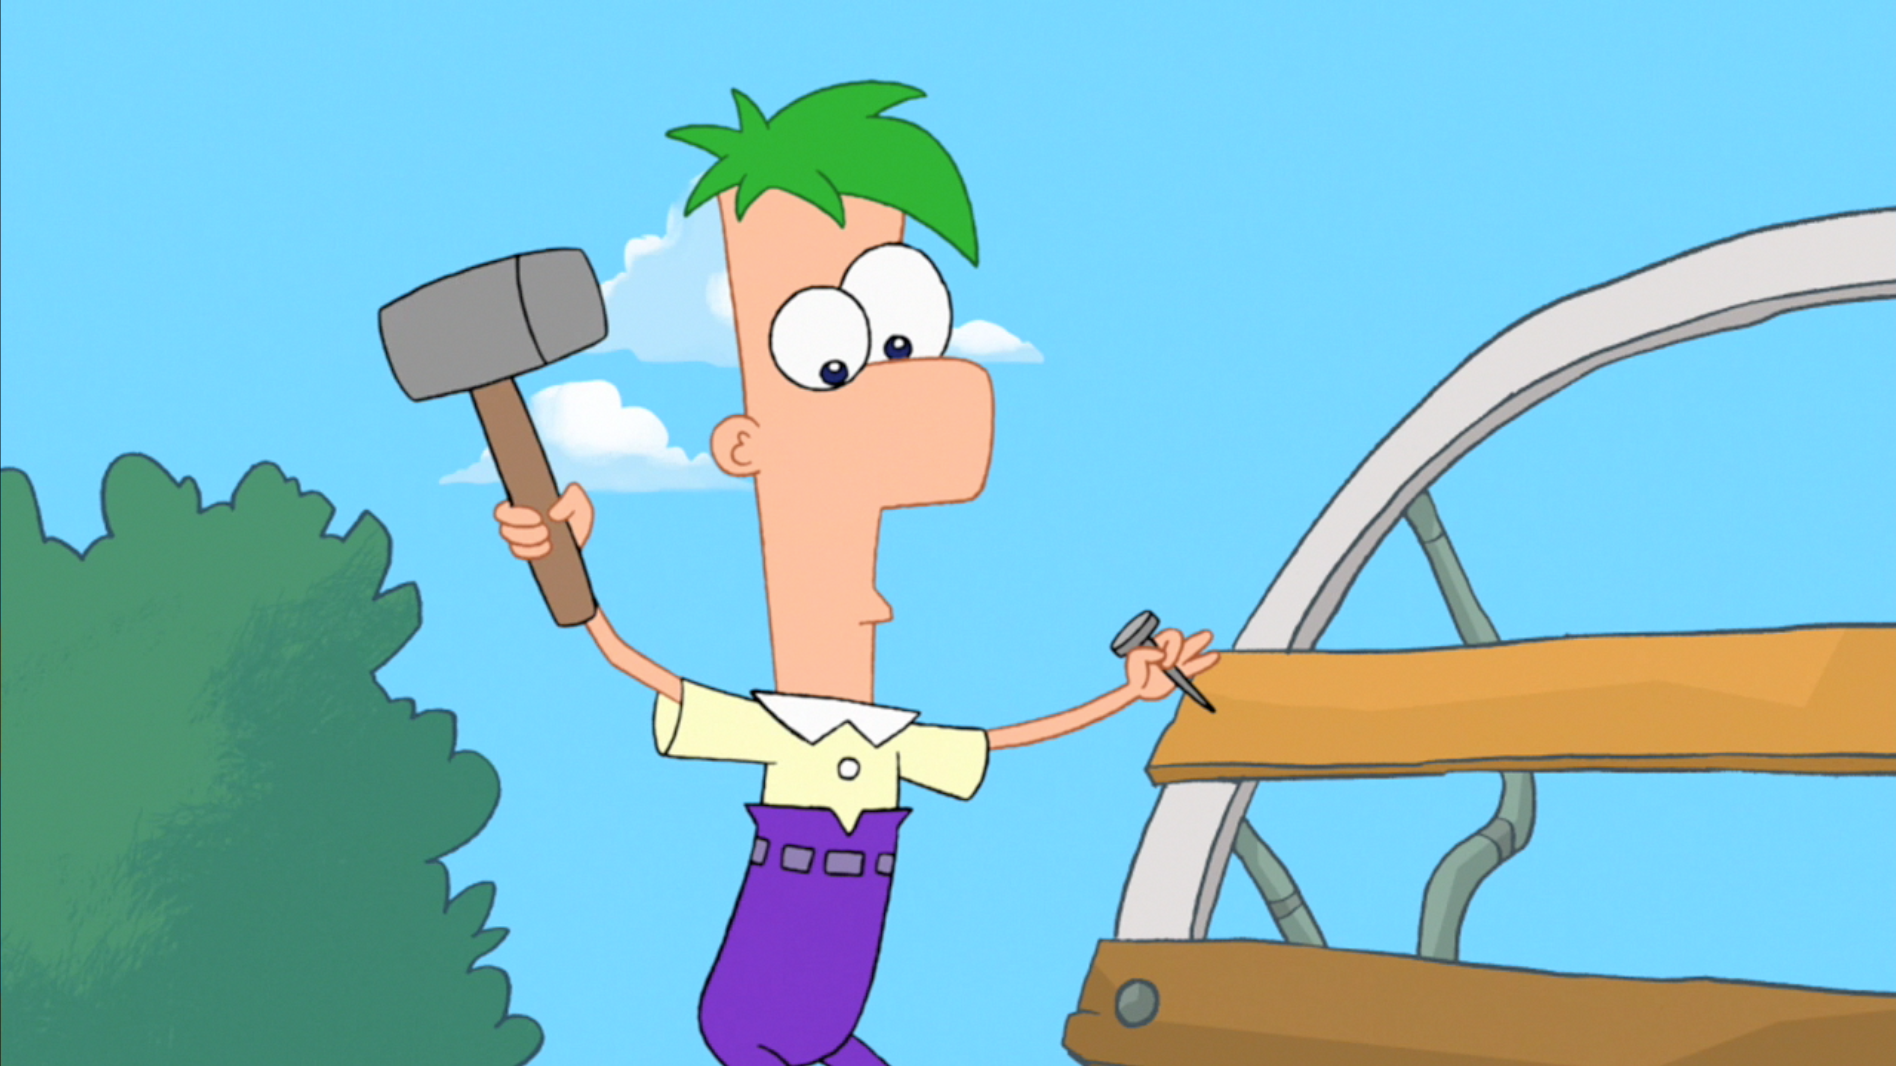 Phineas And Ferb Porn Girl Cousin - Ferb Fletcher | Phineas and Ferb Wiki | FANDOM powered by Wikia